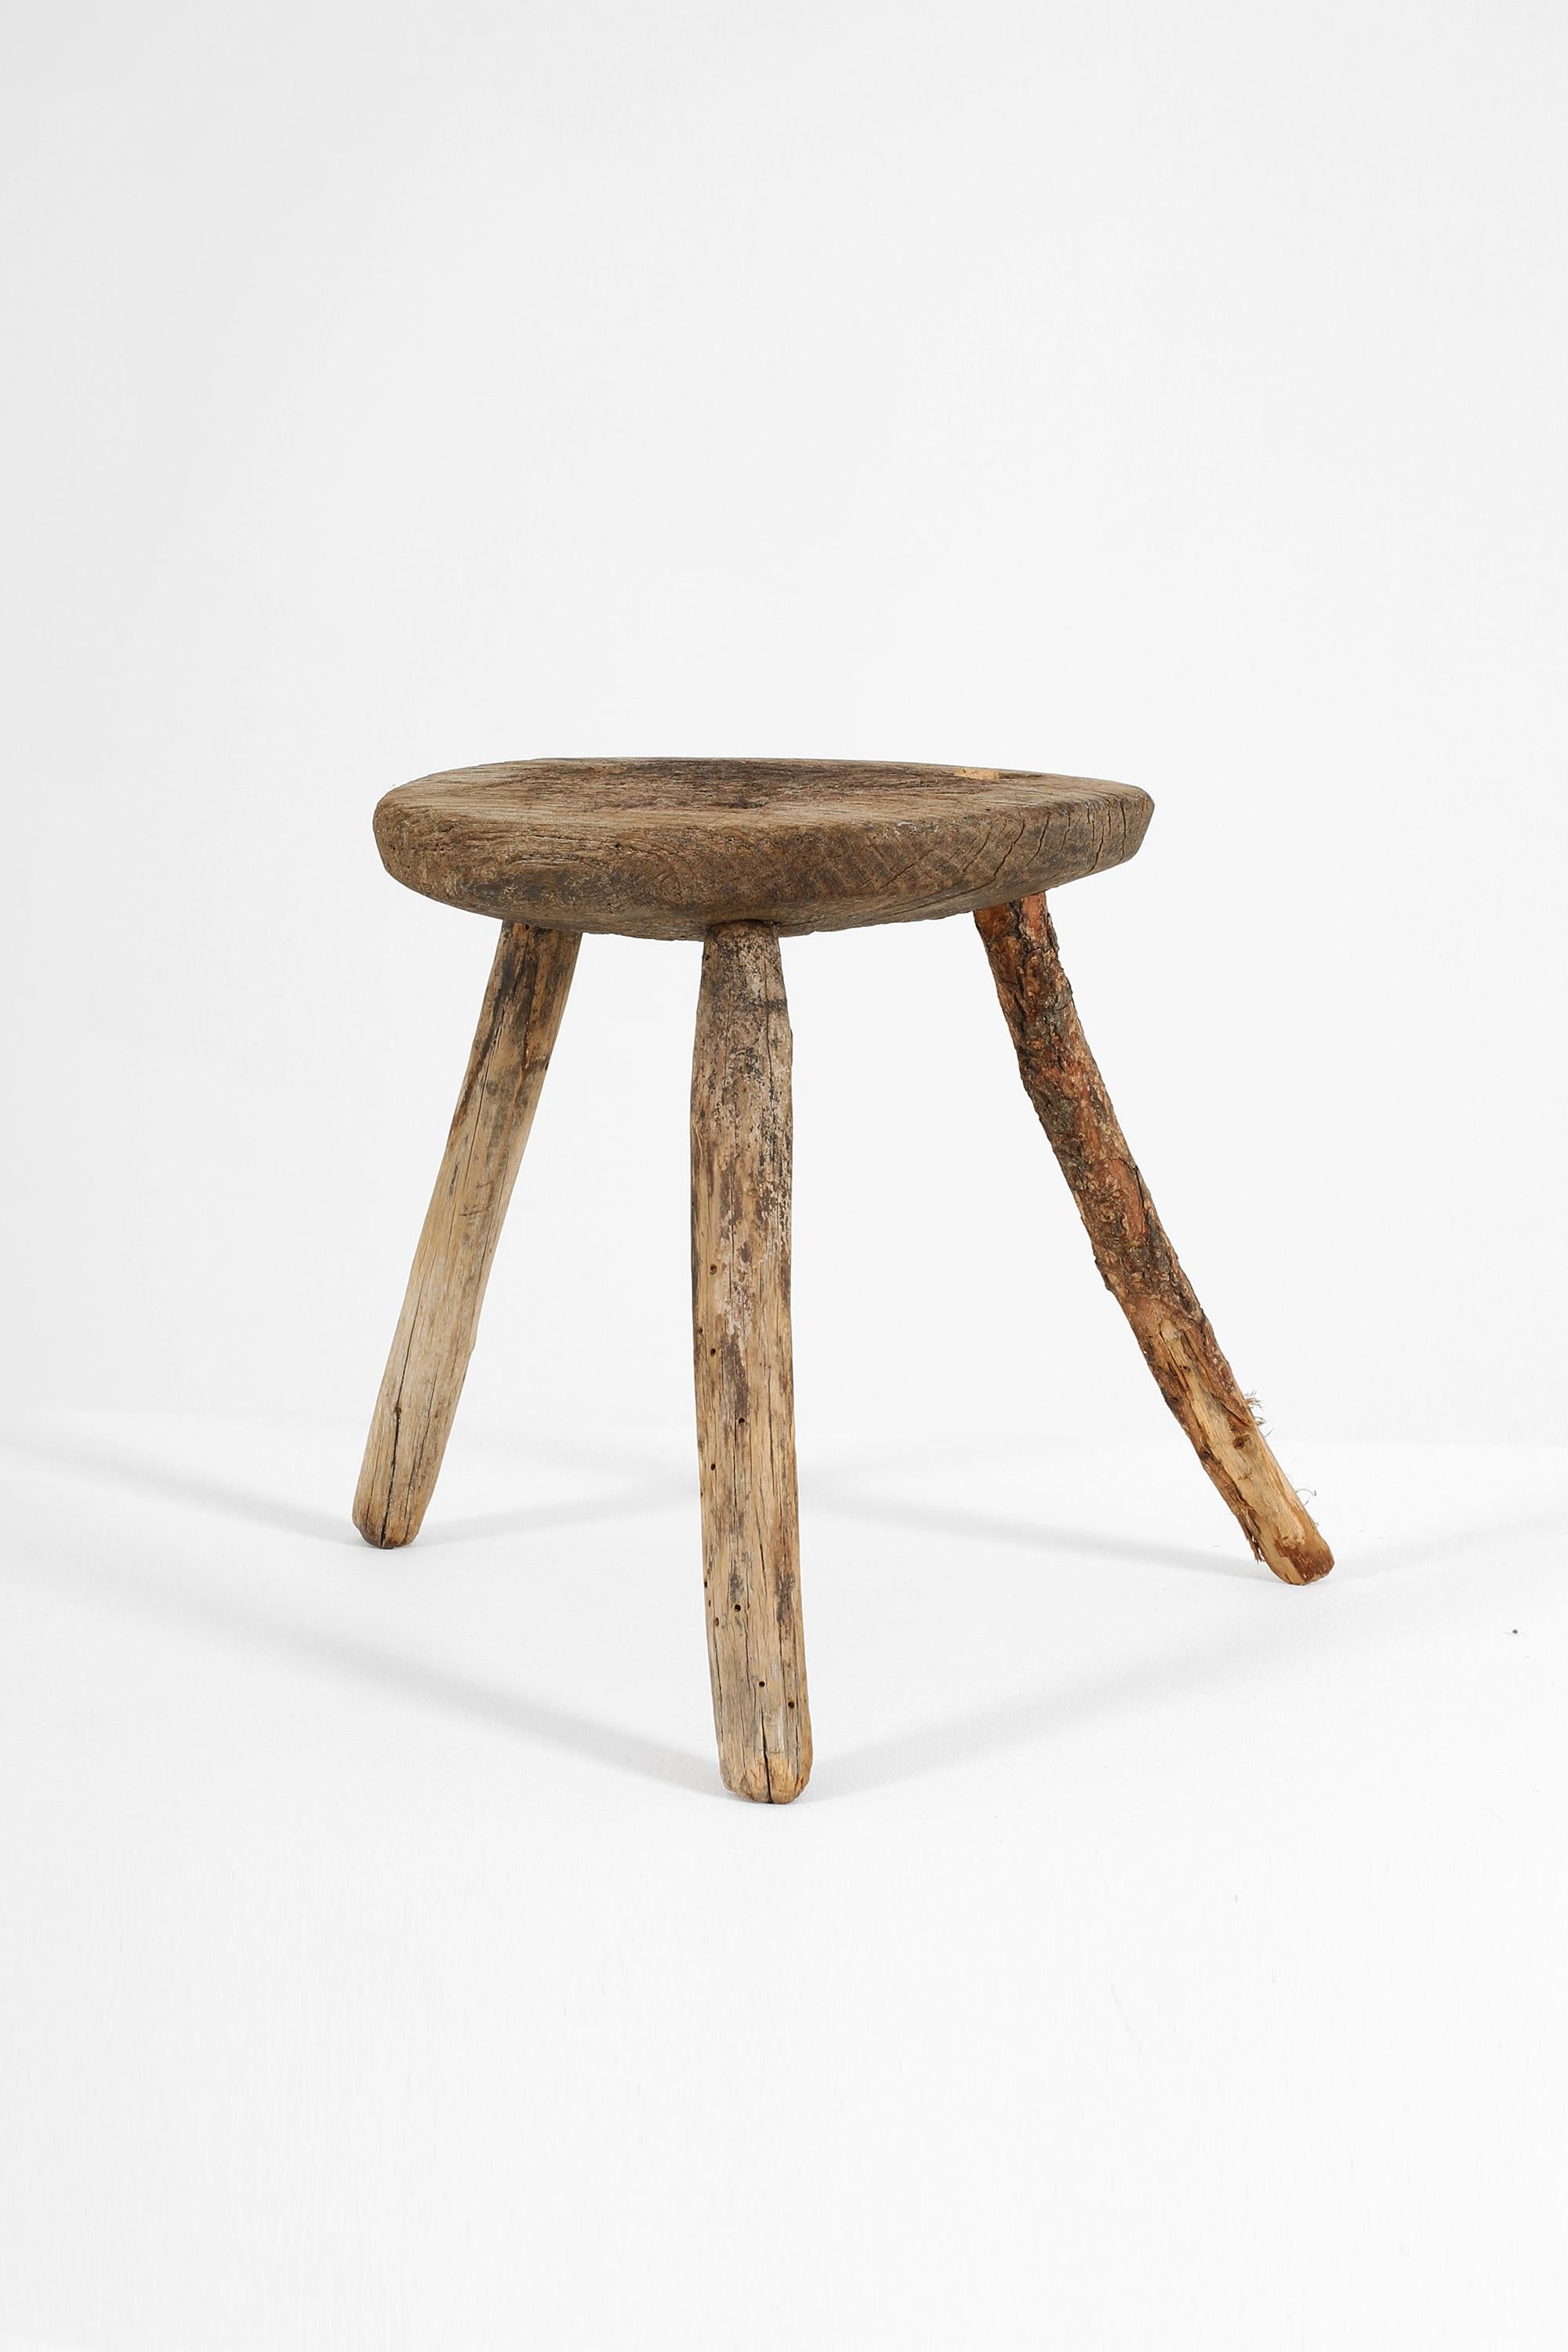 A small 19th century rustic weathered stool from the hilltop city of Matera. The scarred top suggesting a utilitarian past, with one leg a much later replacement. Italian, c. 1860.